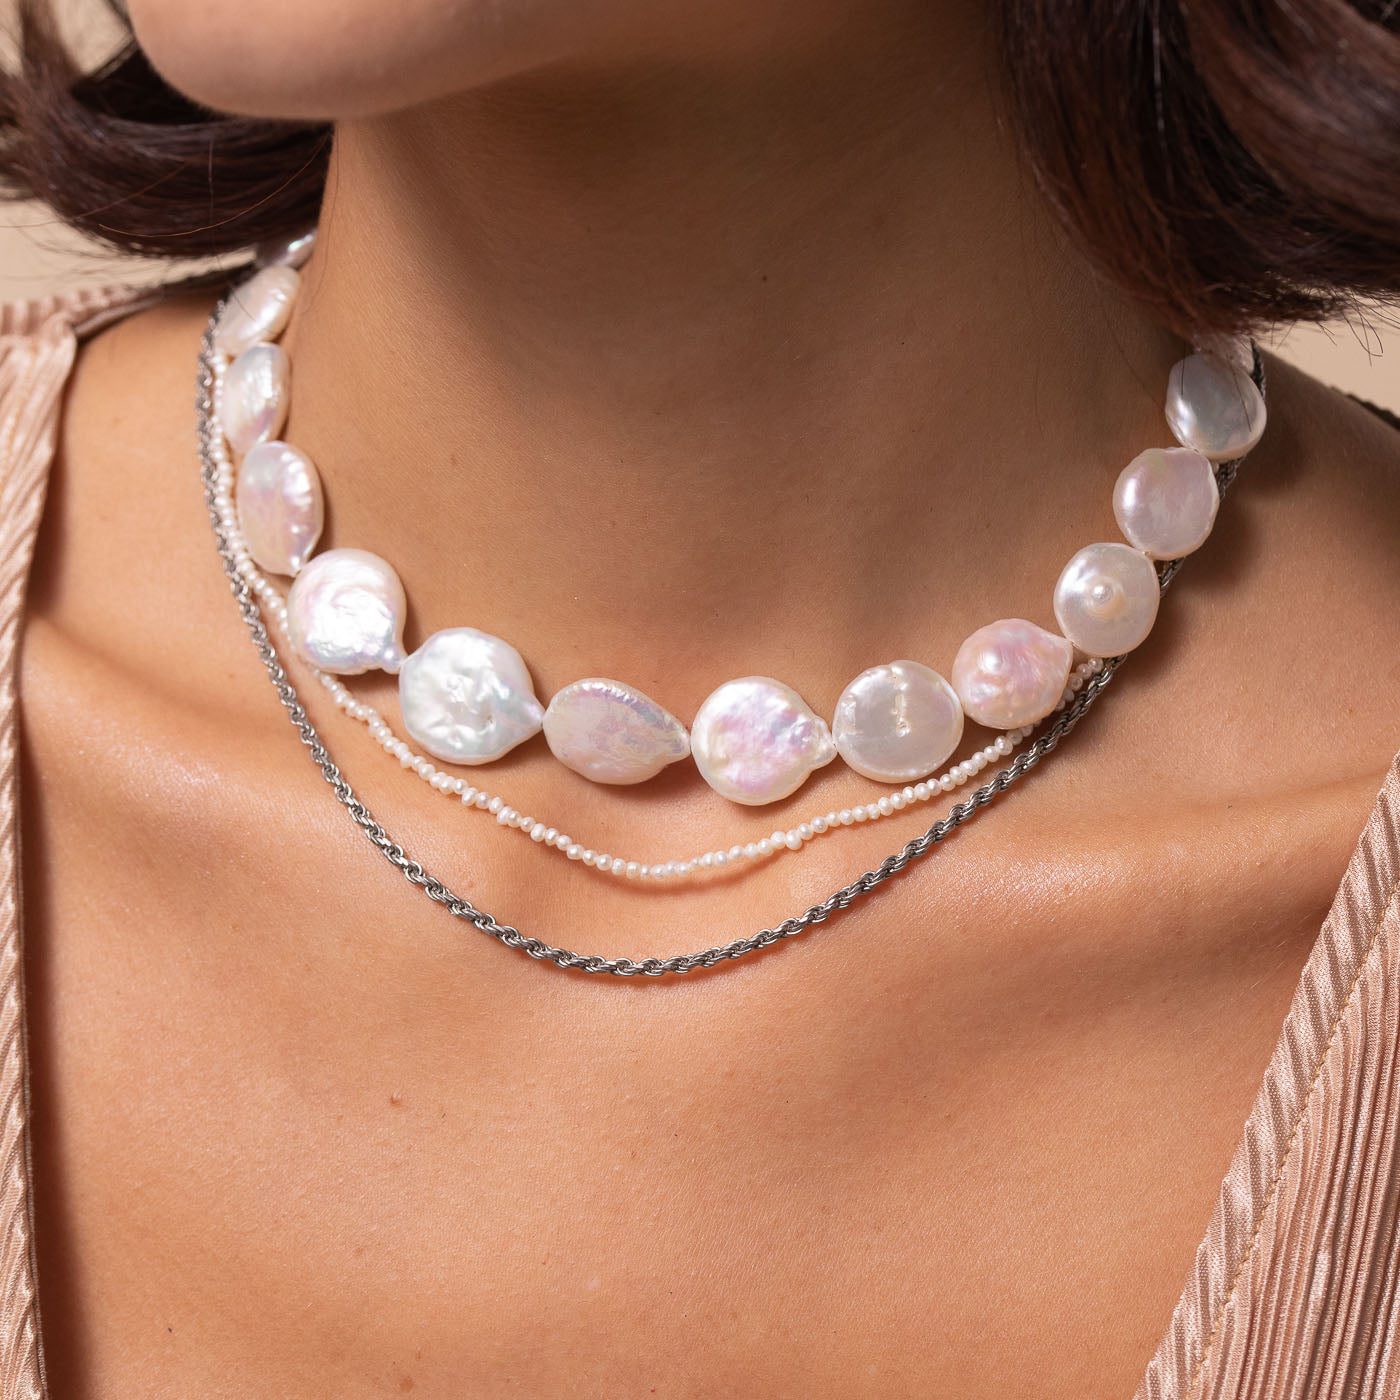 Radiant Pearl Necklace in Silver worn layered with necklaces